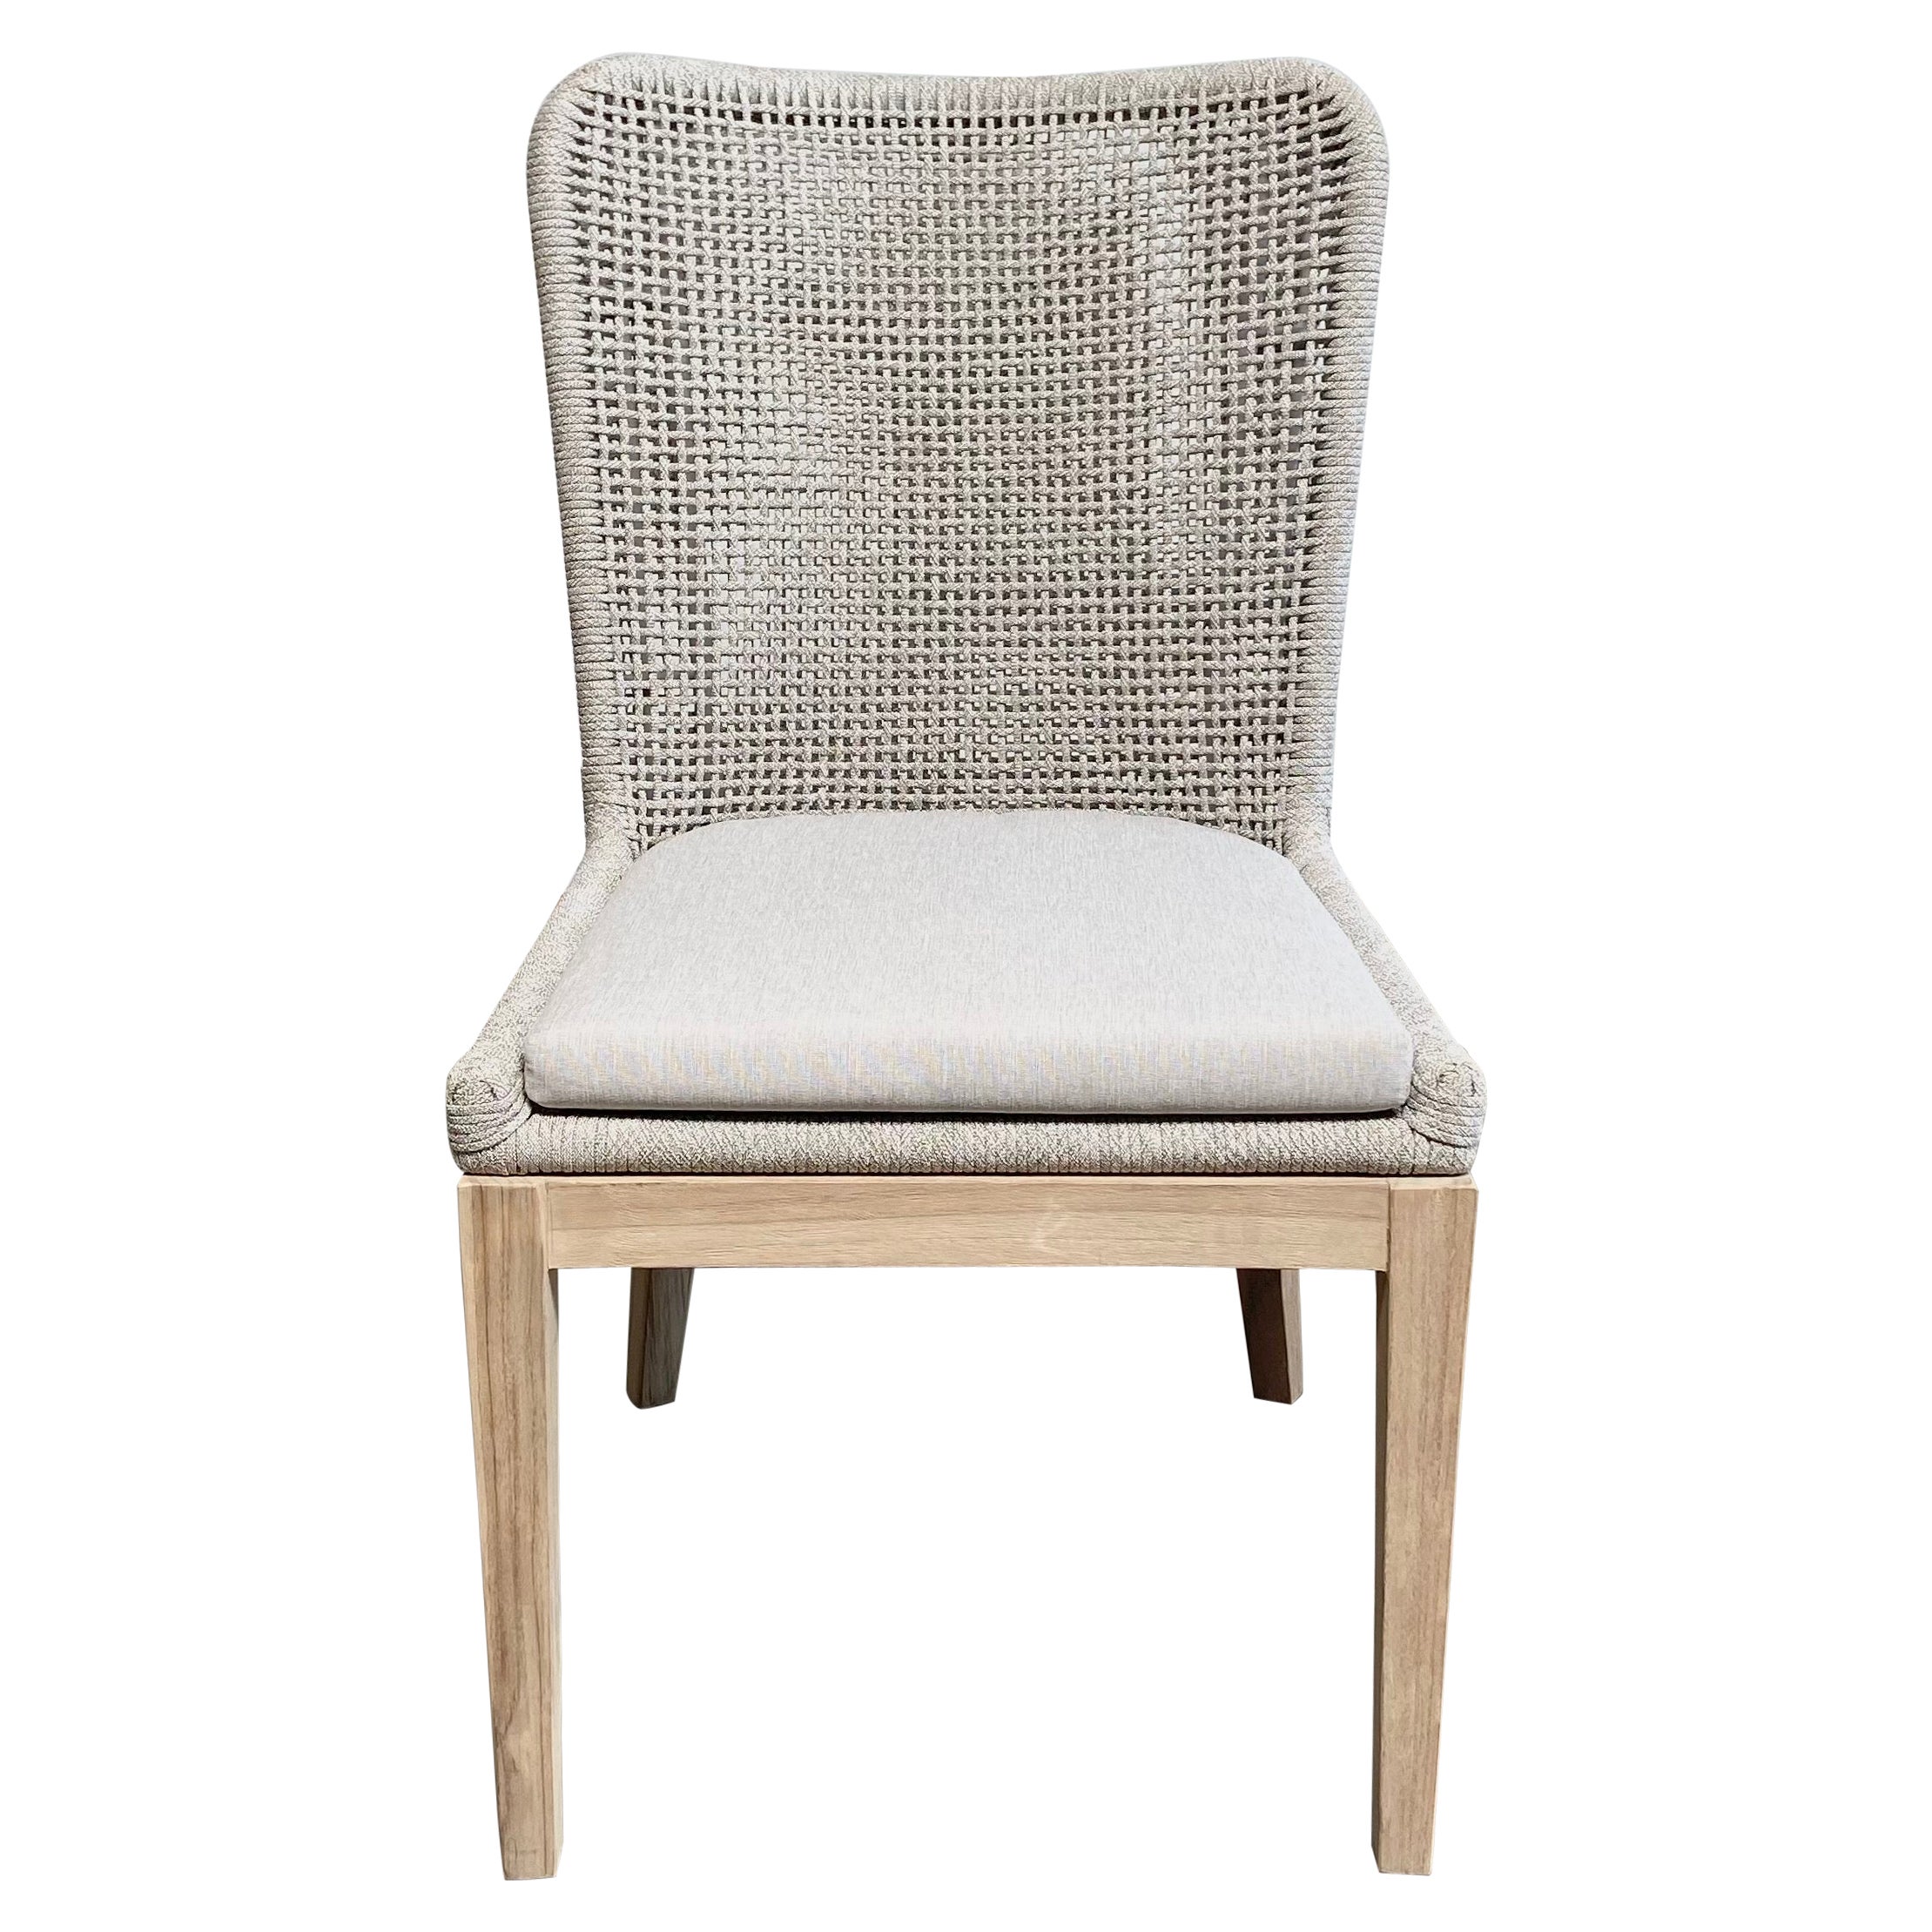 Teak Wood and Woven Rope Outdoor Dining Chairs For Sale